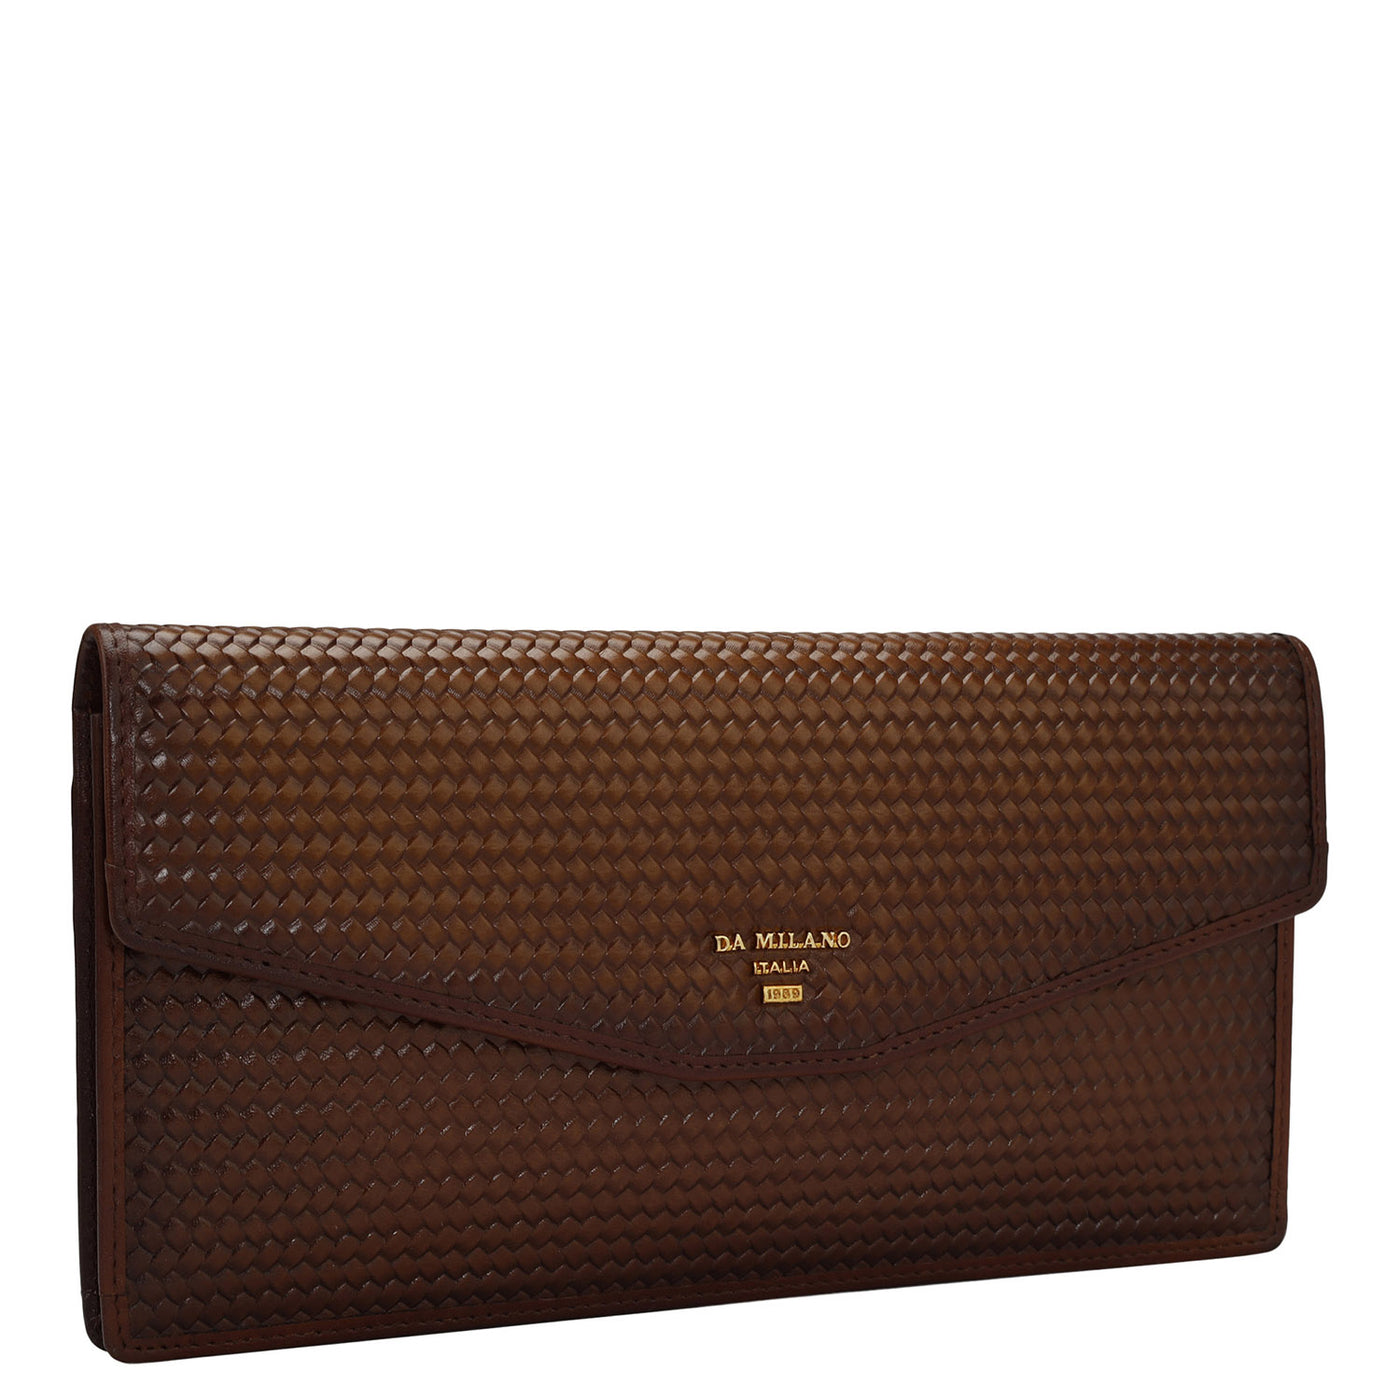 Mat Emboss Leather Cheque Book Cover - Cognac